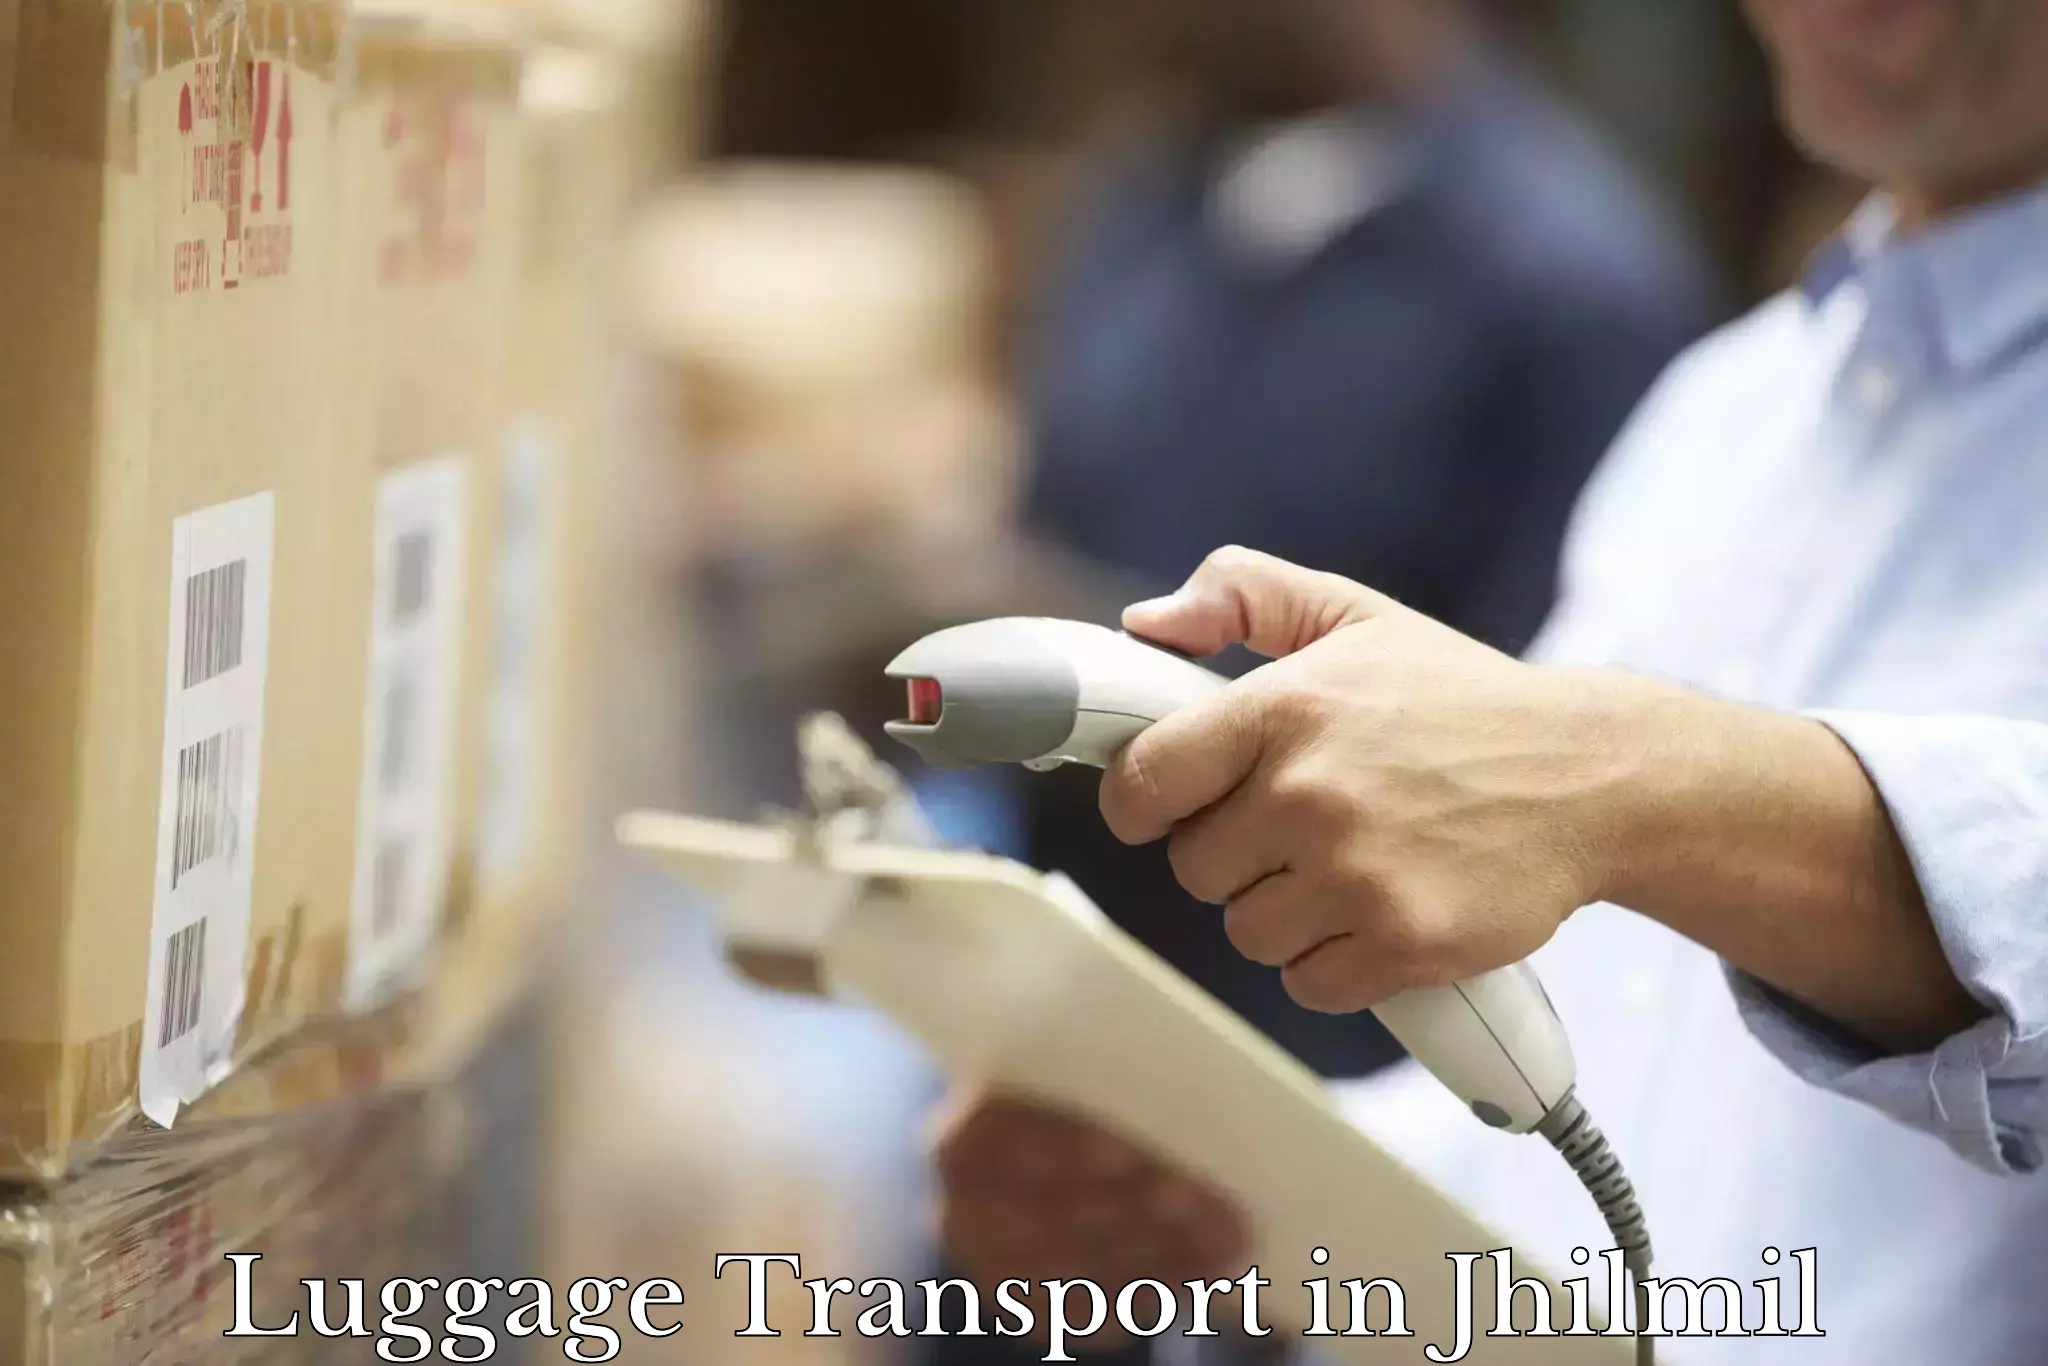 Luggage transport company in Jhilmil